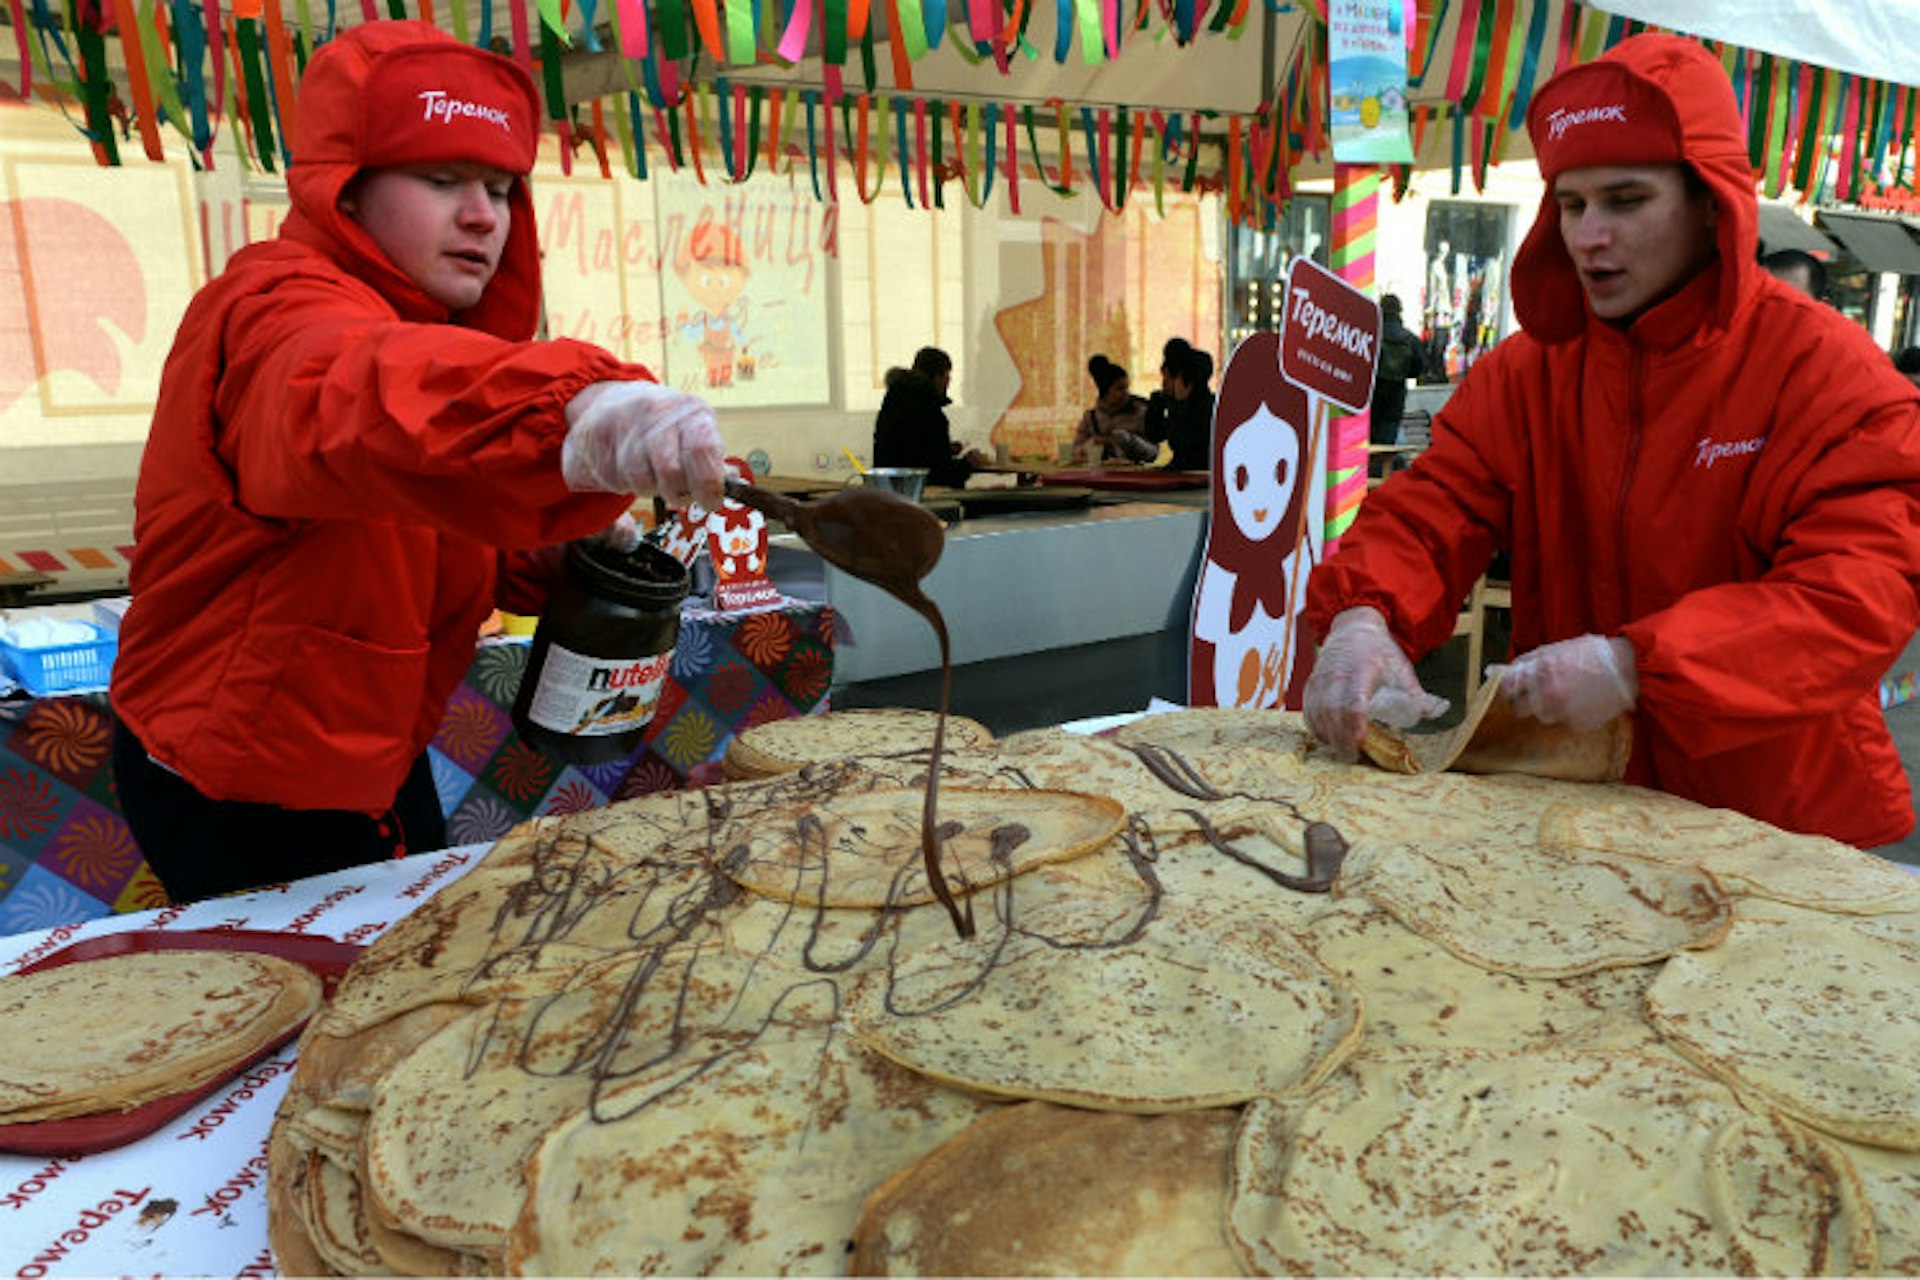 Say goodbye to winter and hello to a giant plate of pancakes for Maslenitsa in Moscow. Image by Vasily Maximov / AFP / Getty